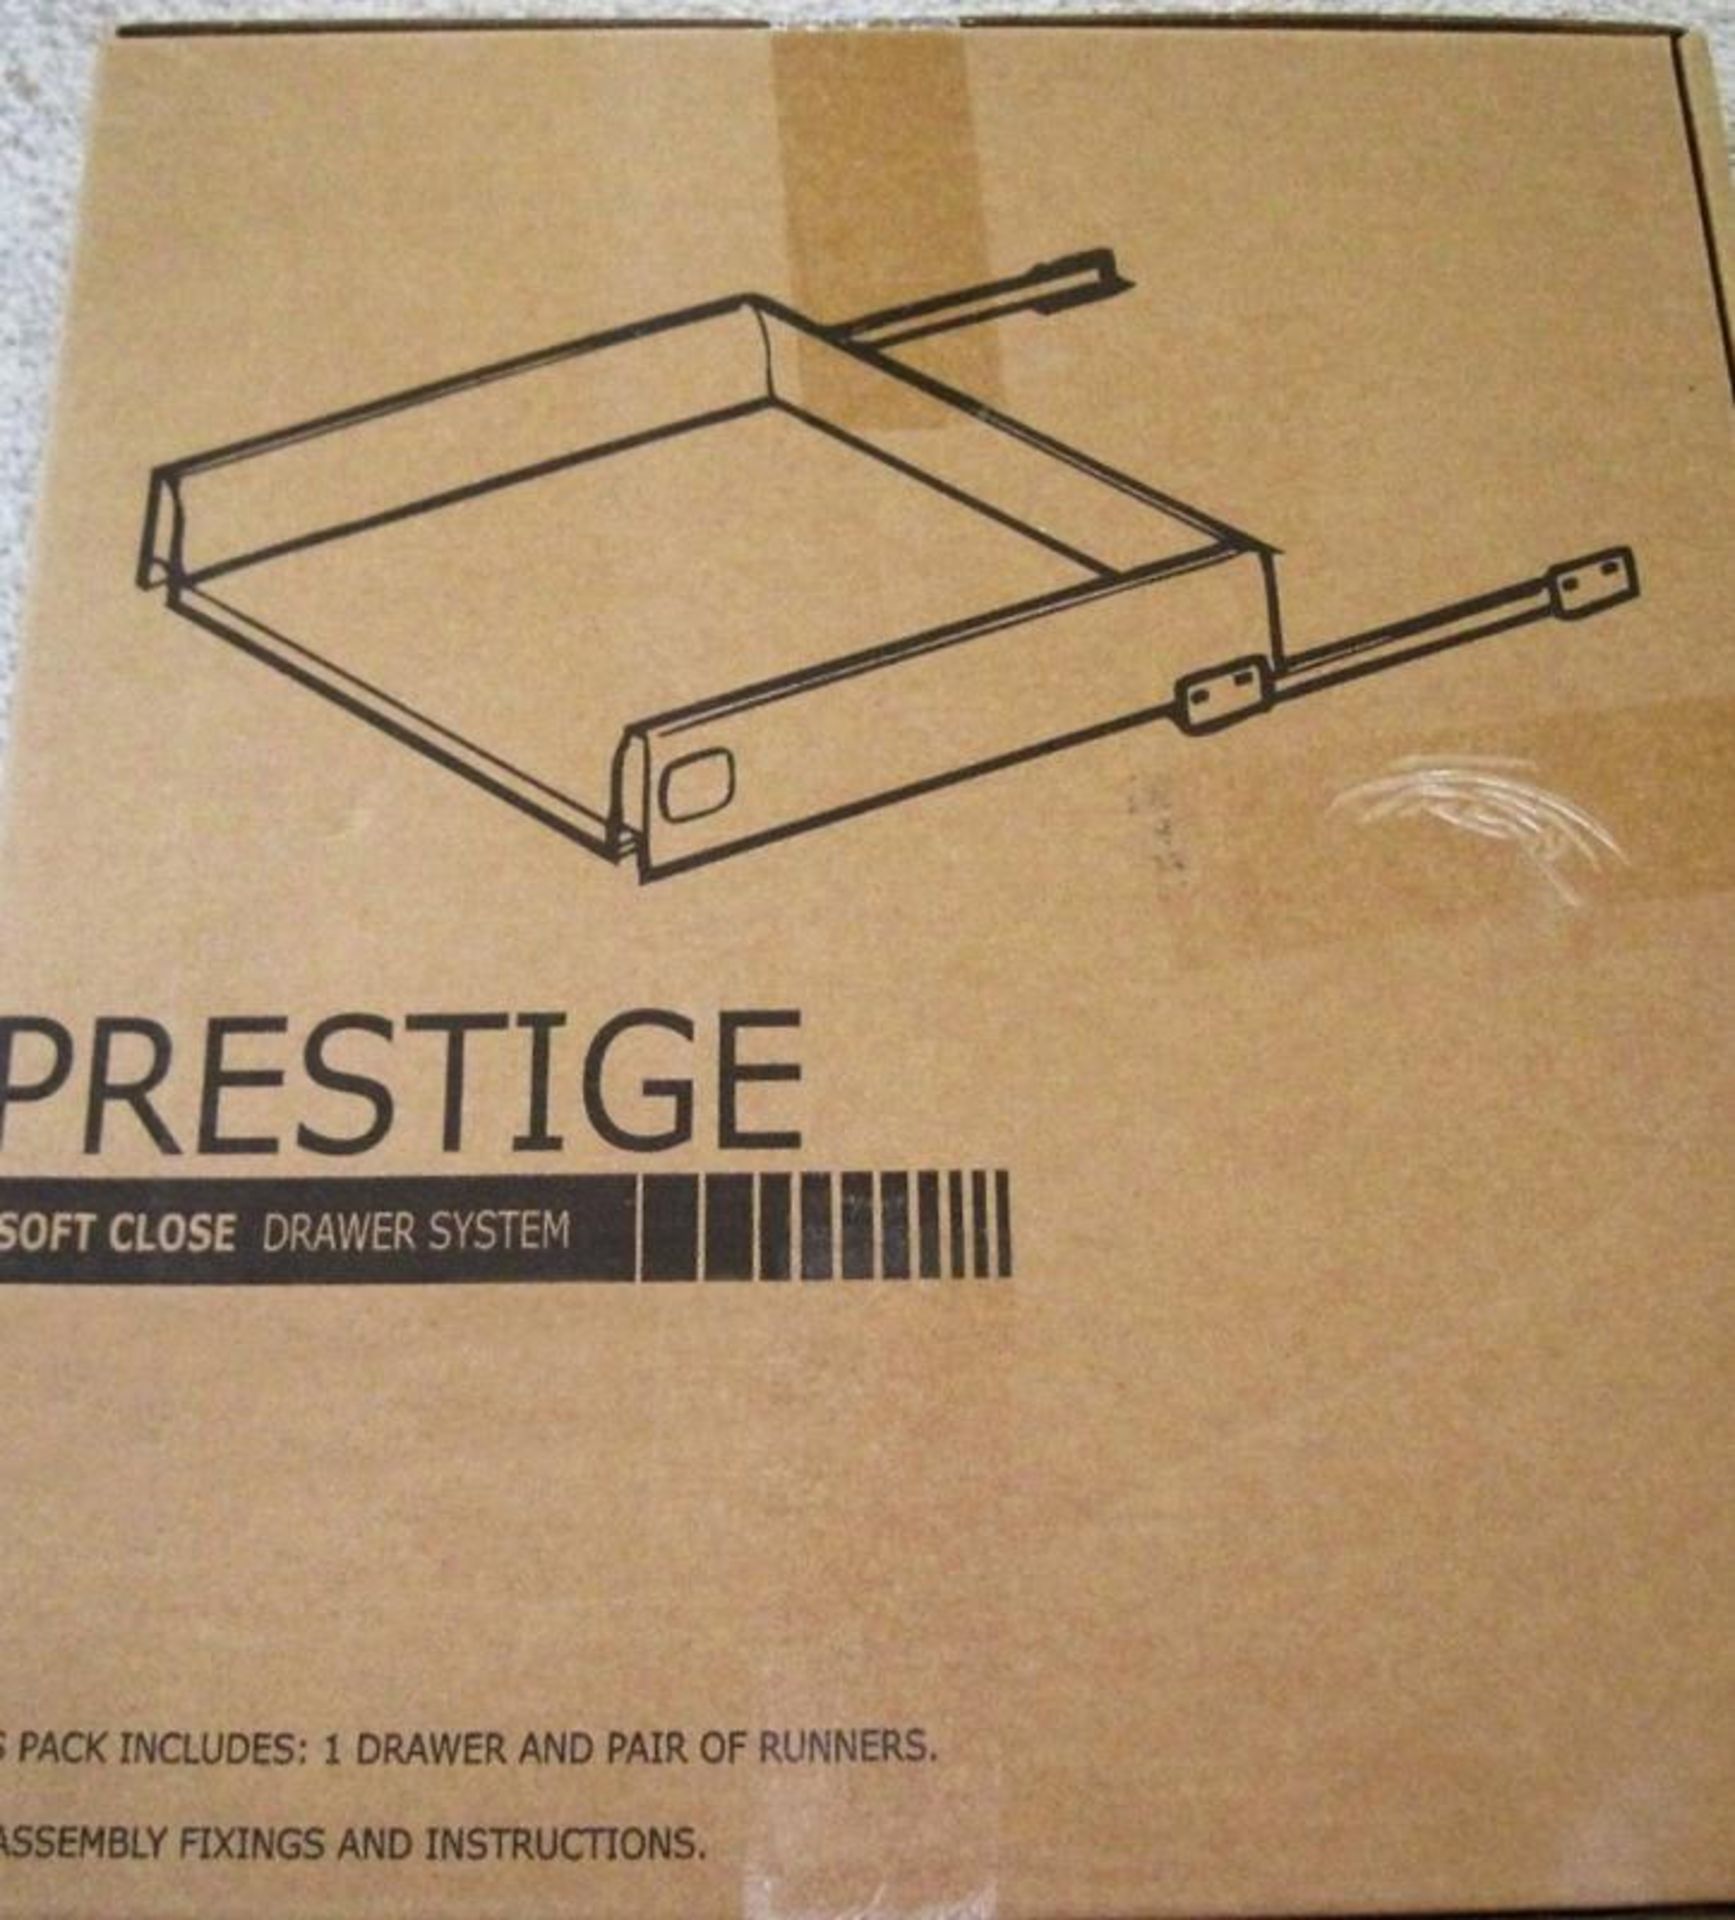 3 x 400mm Soft Close Kitchen Drawer Packs - B&Q Prestige Trade - Brand New Stock - Features - Image 2 of 2